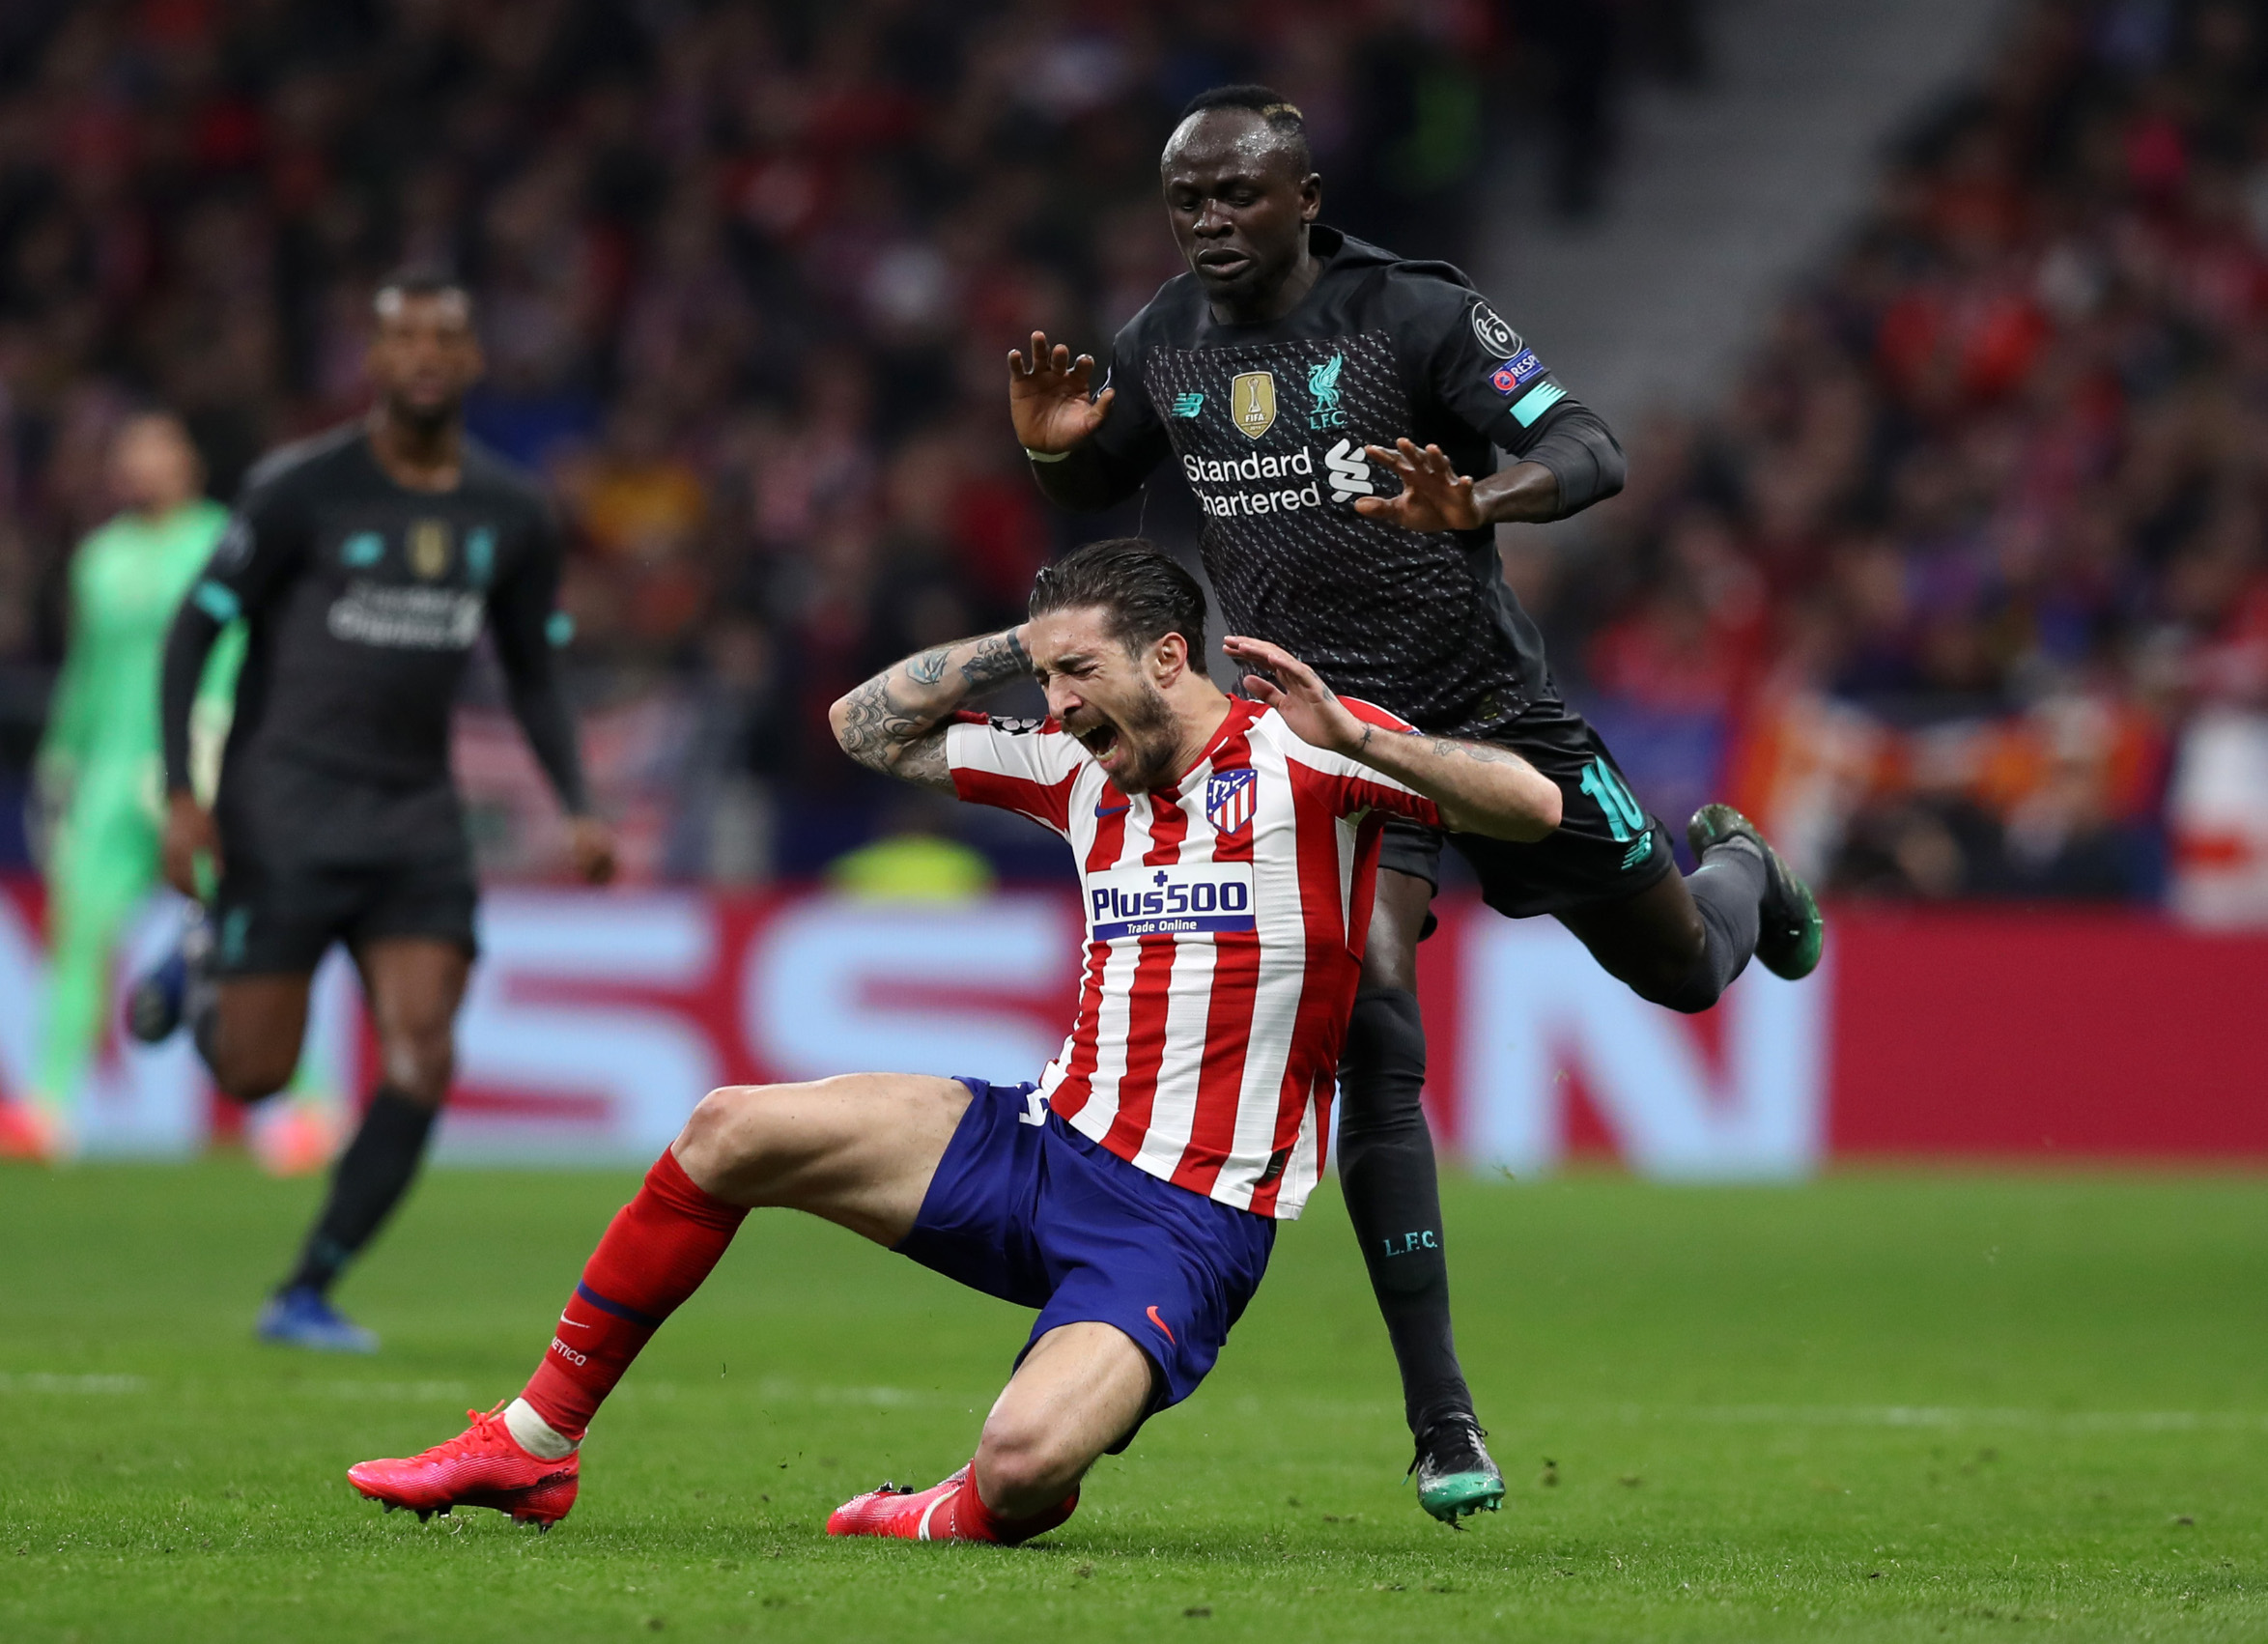 MADRID, SPAIN - FEBRUARY 18: Sime Vrsaljko of Atletico Madrid is challenged by Sadio Mane of Liverpool during the UEFA Champions League round of 16 first leg match between Atletico Madrid and Liverpool FC at Wanda Metropolitano on February 18, 2020 in Madrid, Spain. (Photo by Angel Martinez/Getty Images)